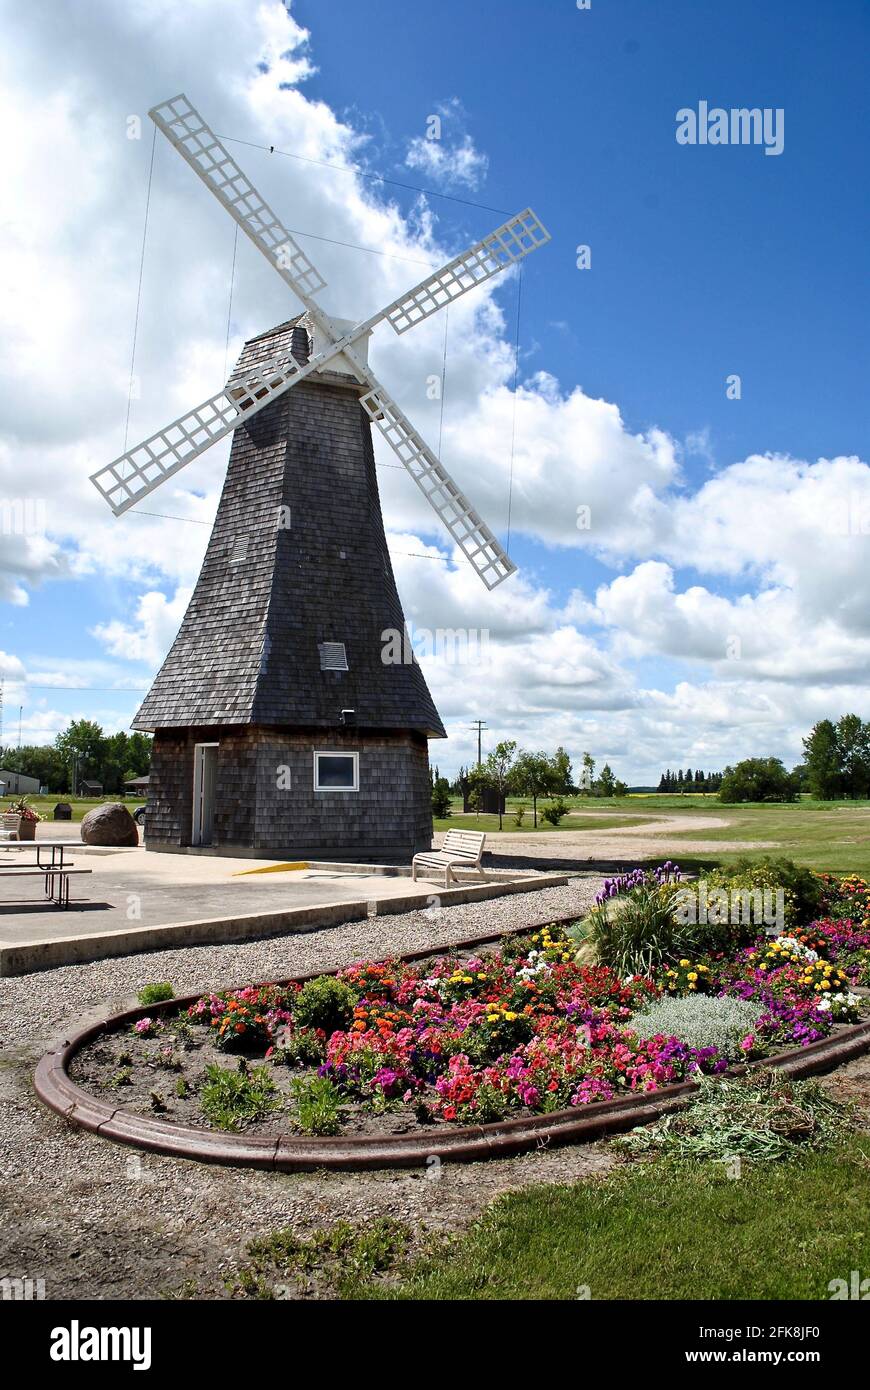 Windmill in Holland, Manitoba, Canada near the Trans Canada Highway. Tribute to the windmills of Holland (Netherlands). Canadian roadside attraction. Stock Photo